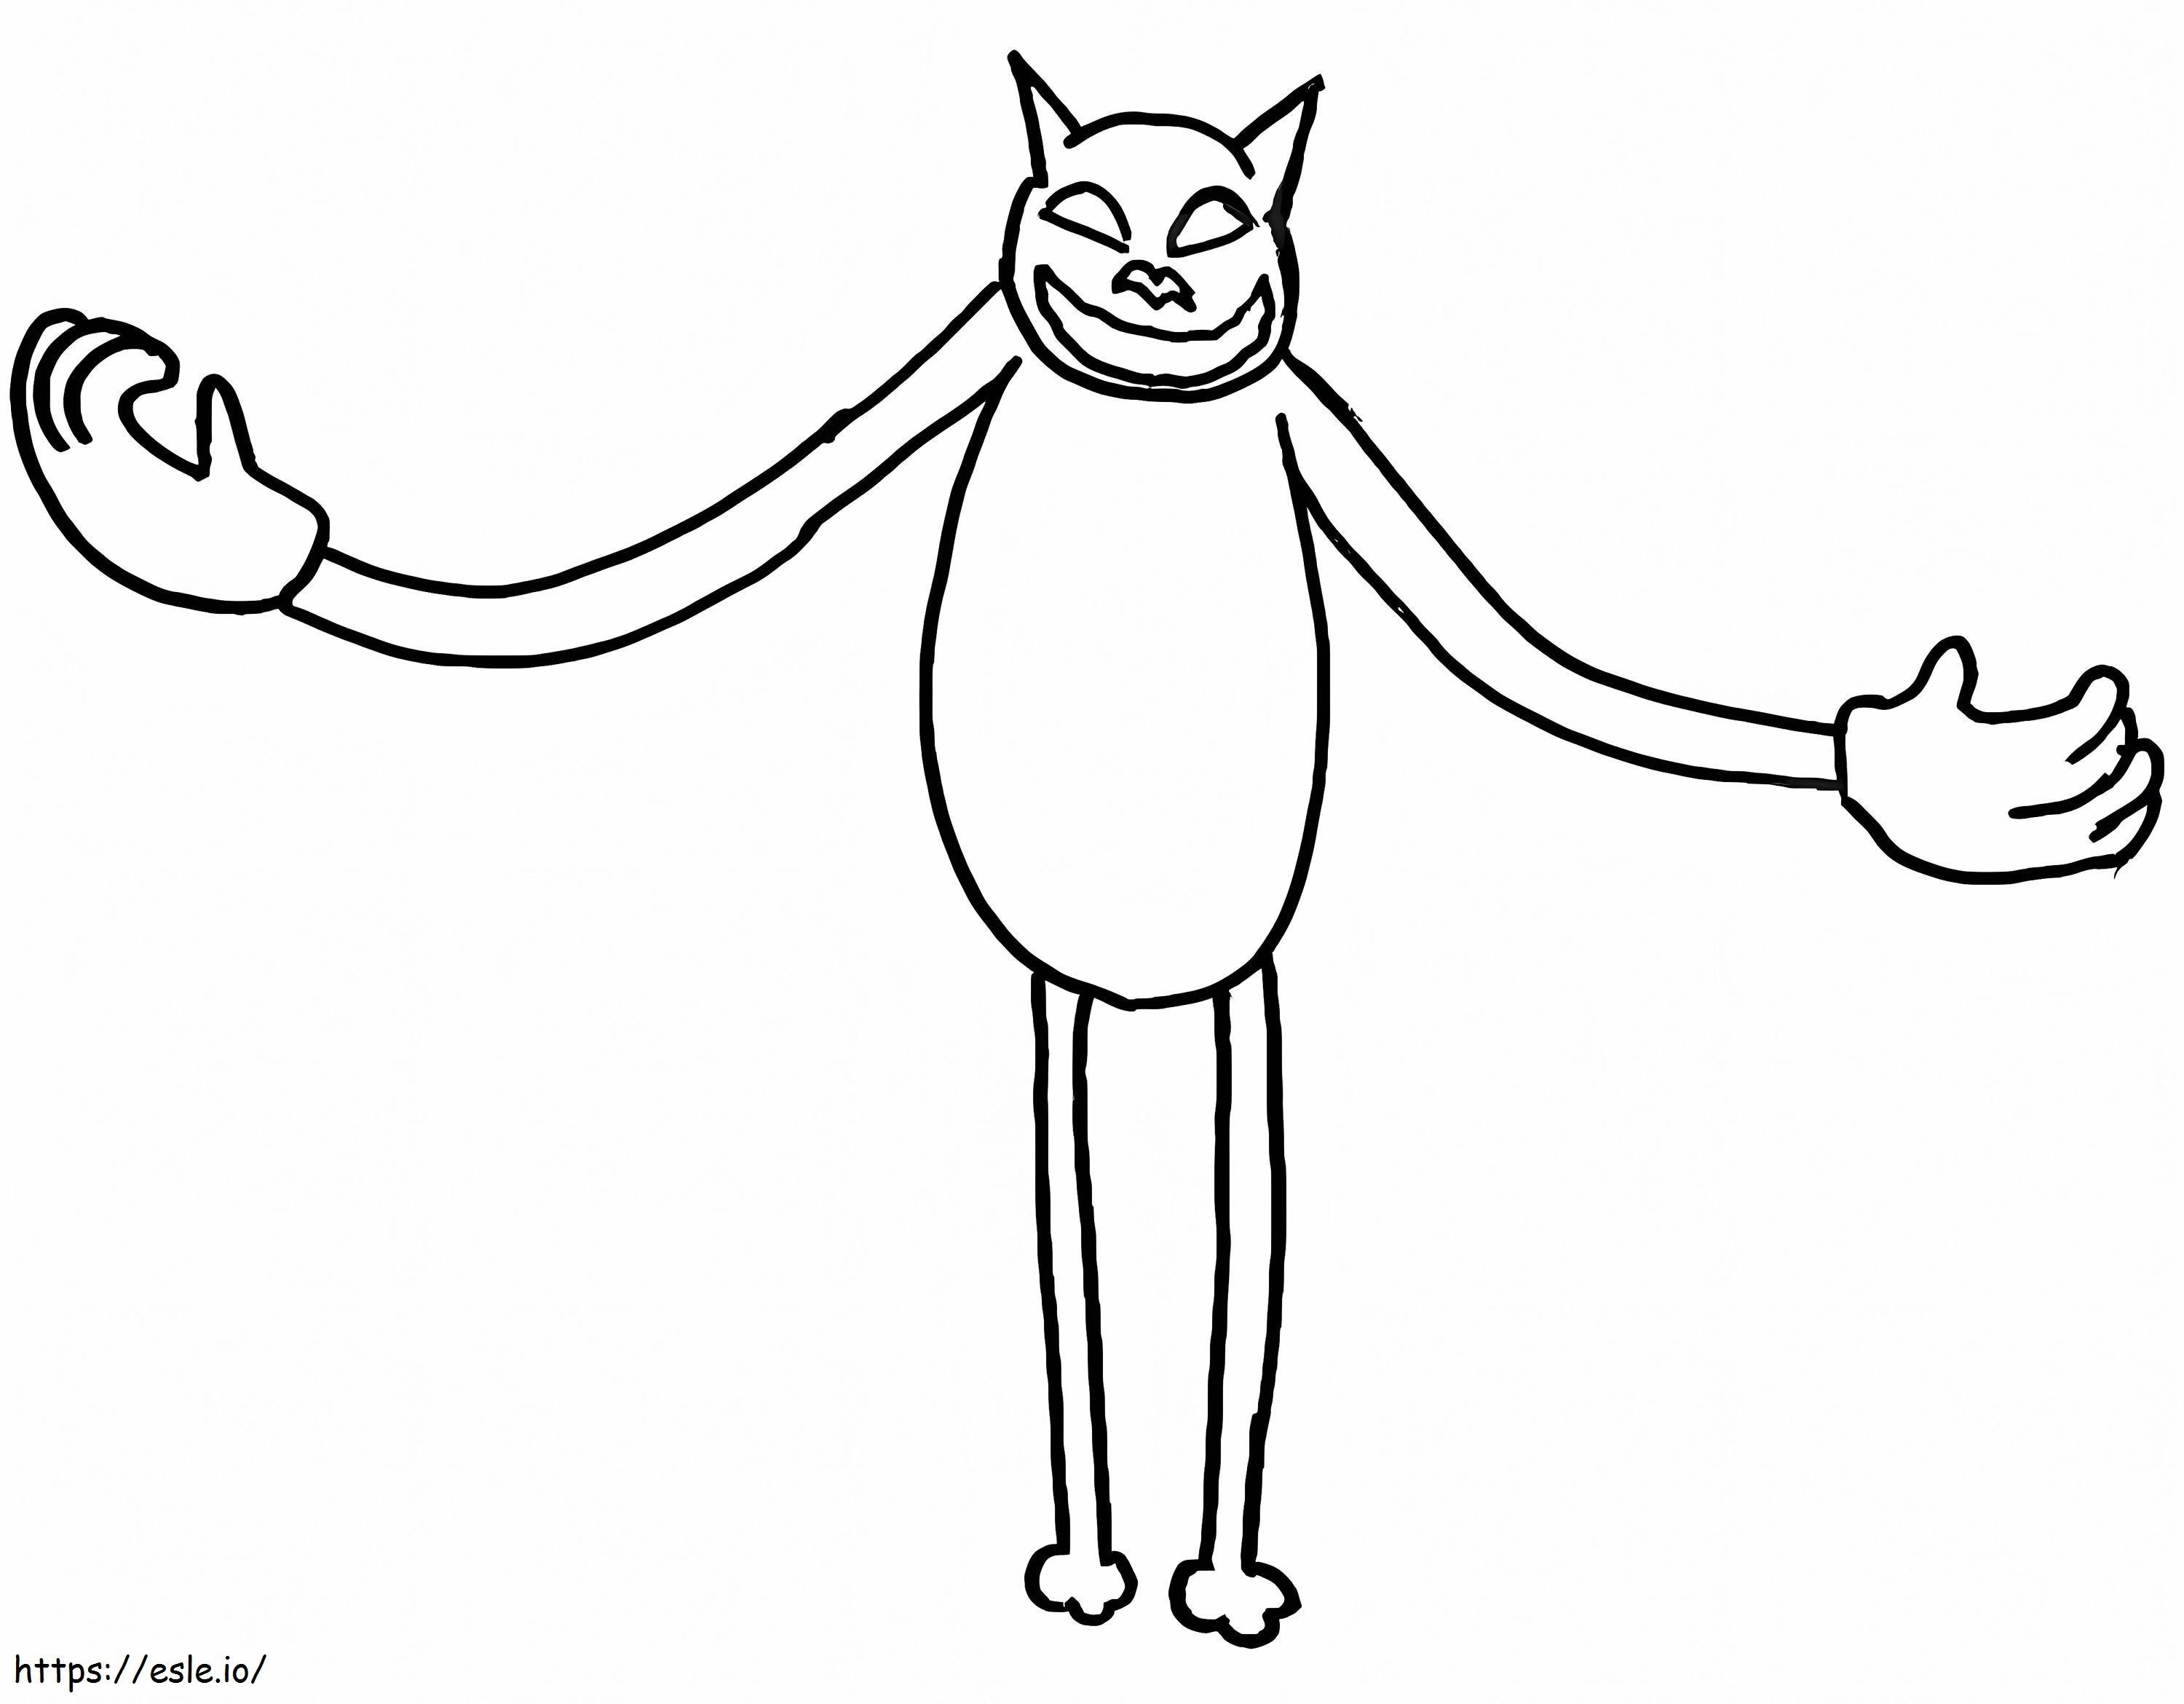 Giant Cartoon Cat coloring page